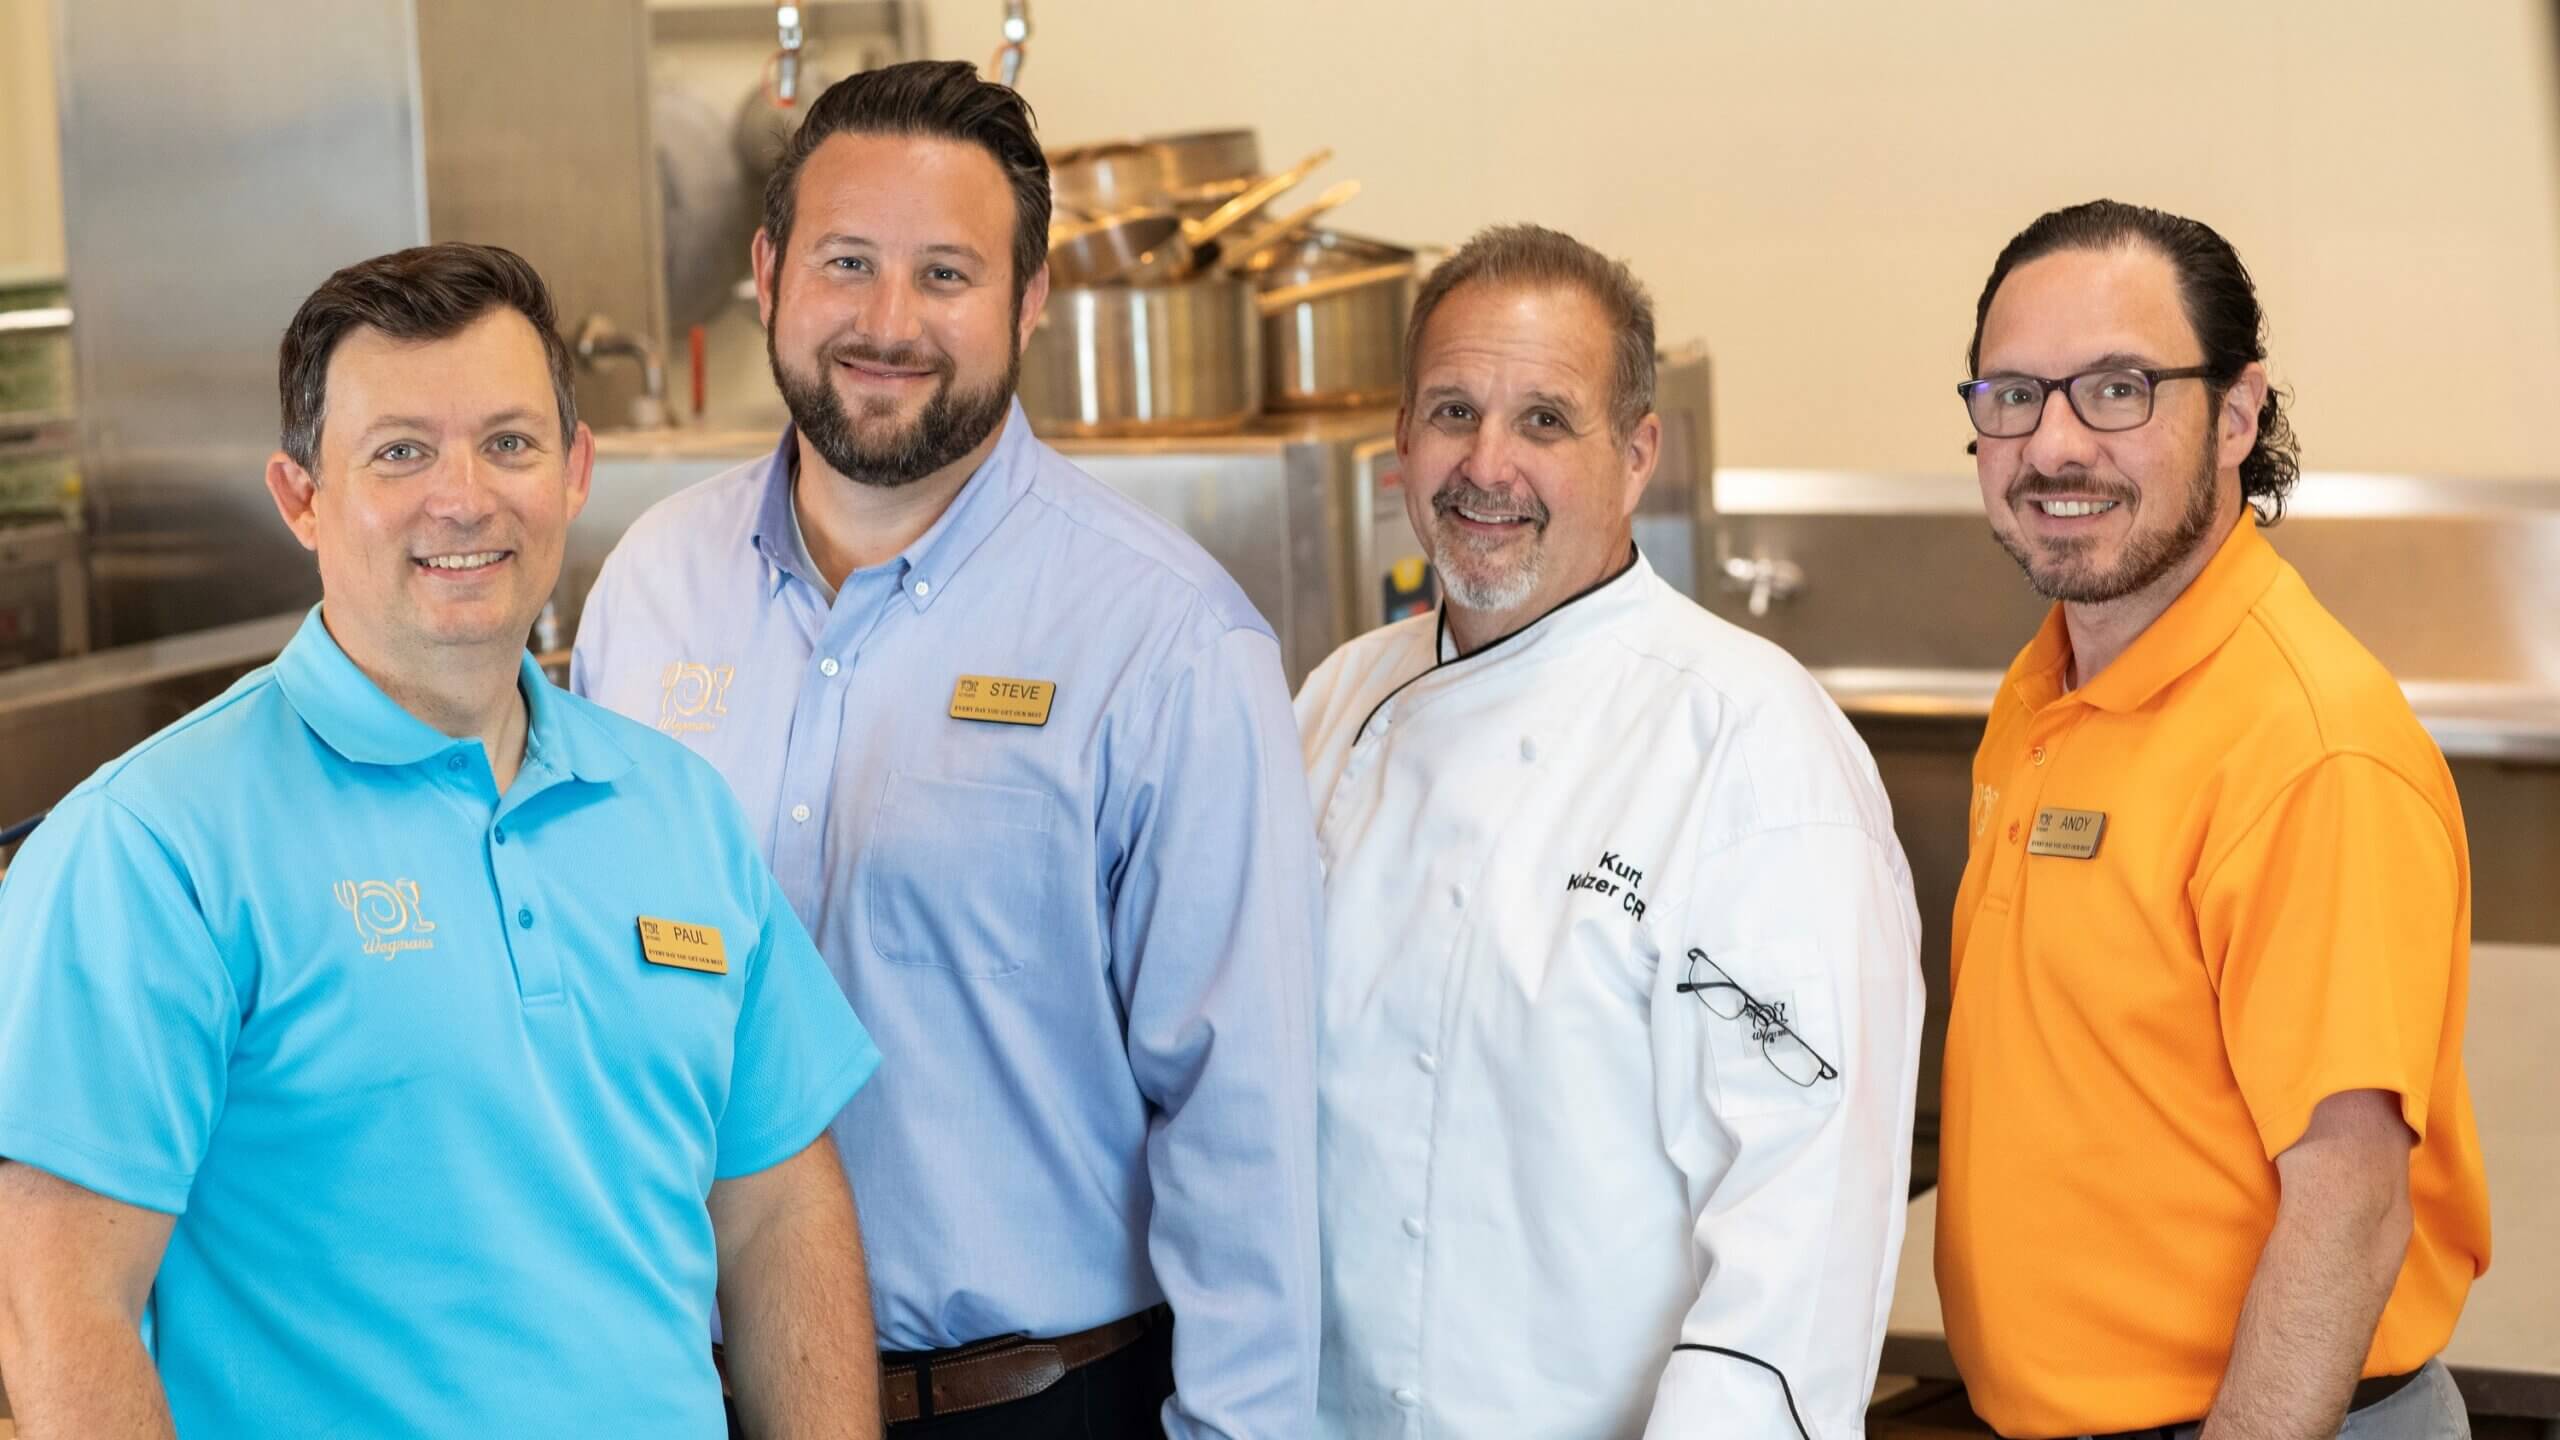 Paul, Steve, Kurt, and Andy standing together smiling in test kitchen wearing Wegmans polos